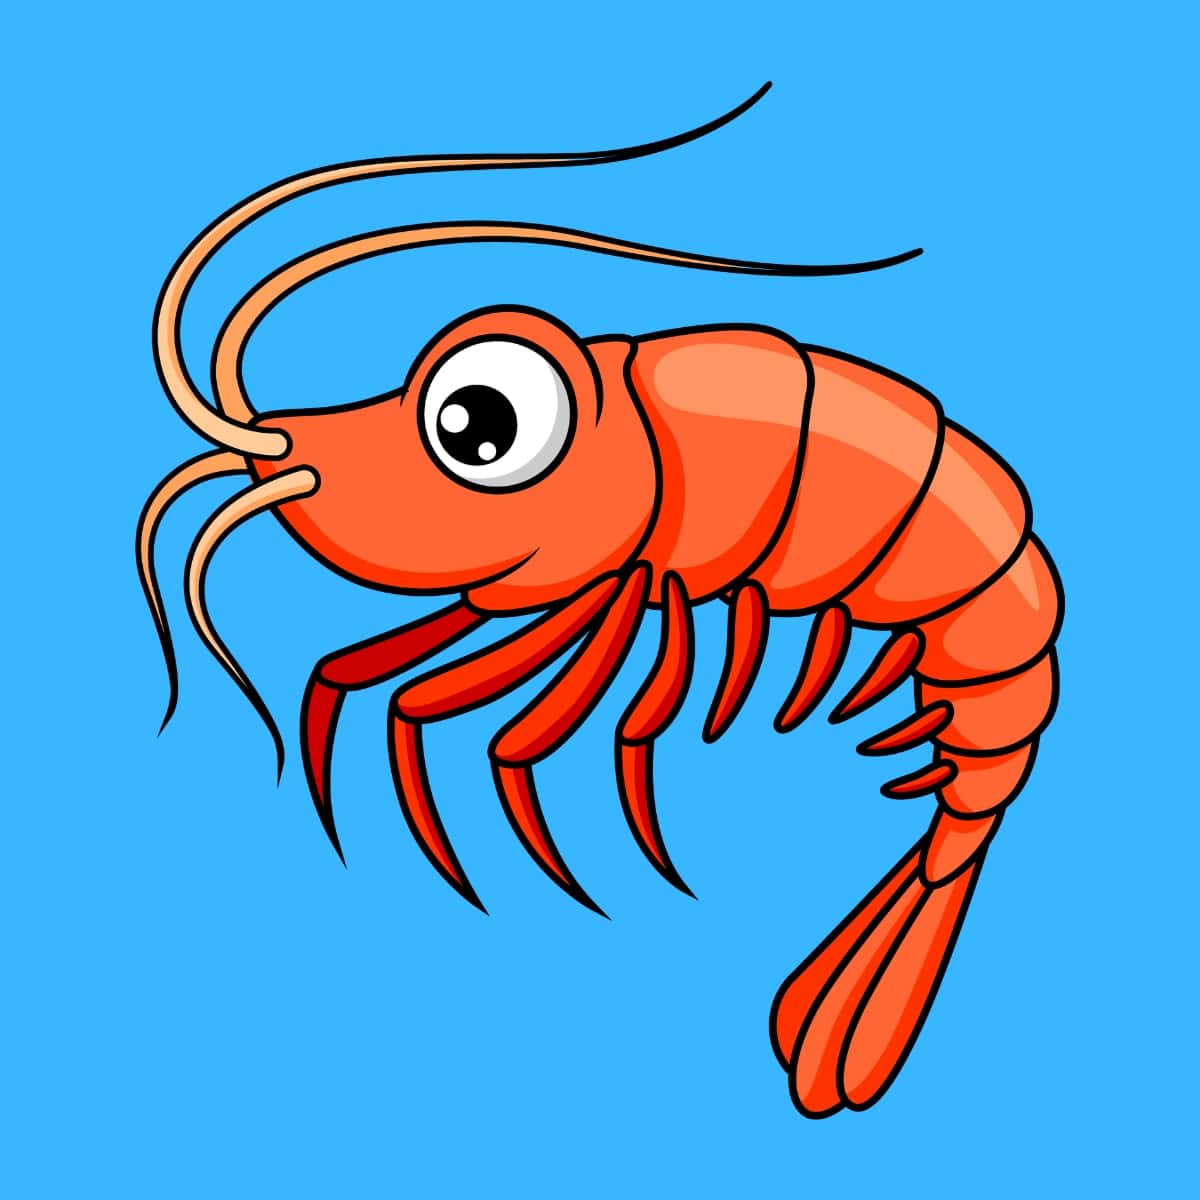 Cartoon graphic of a lovely smiling shrimp with long whiskers on blue background.